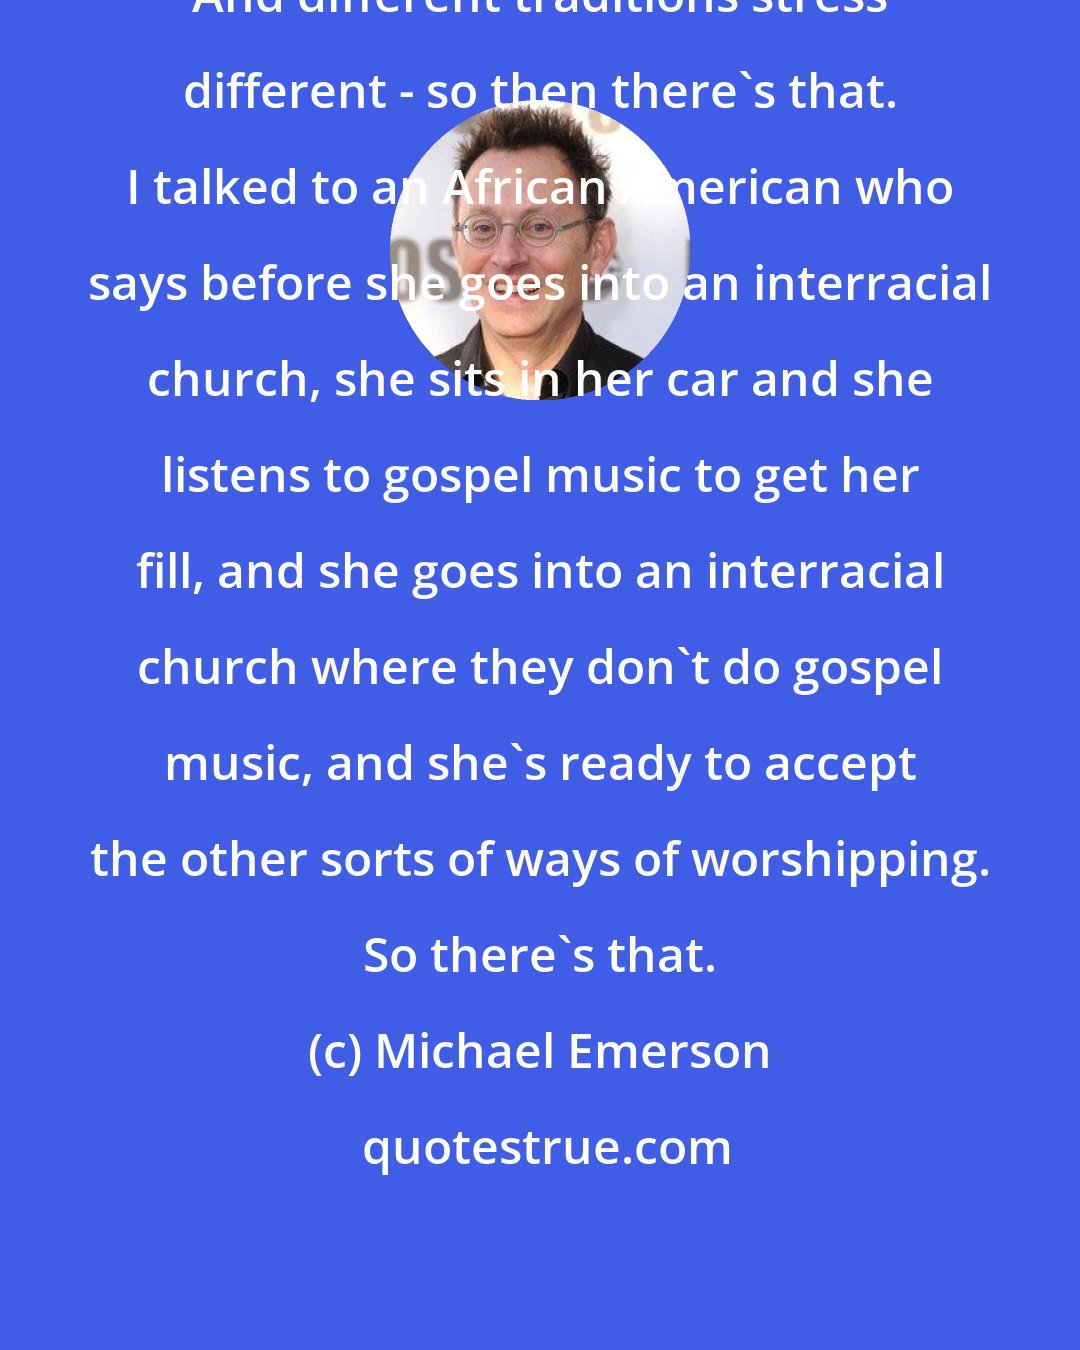 Michael Emerson: And different traditions stress different - so then there's that. I talked to an African American who says before she goes into an interracial church, she sits in her car and she listens to gospel music to get her fill, and she goes into an interracial church where they don't do gospel music, and she's ready to accept the other sorts of ways of worshipping. So there's that.